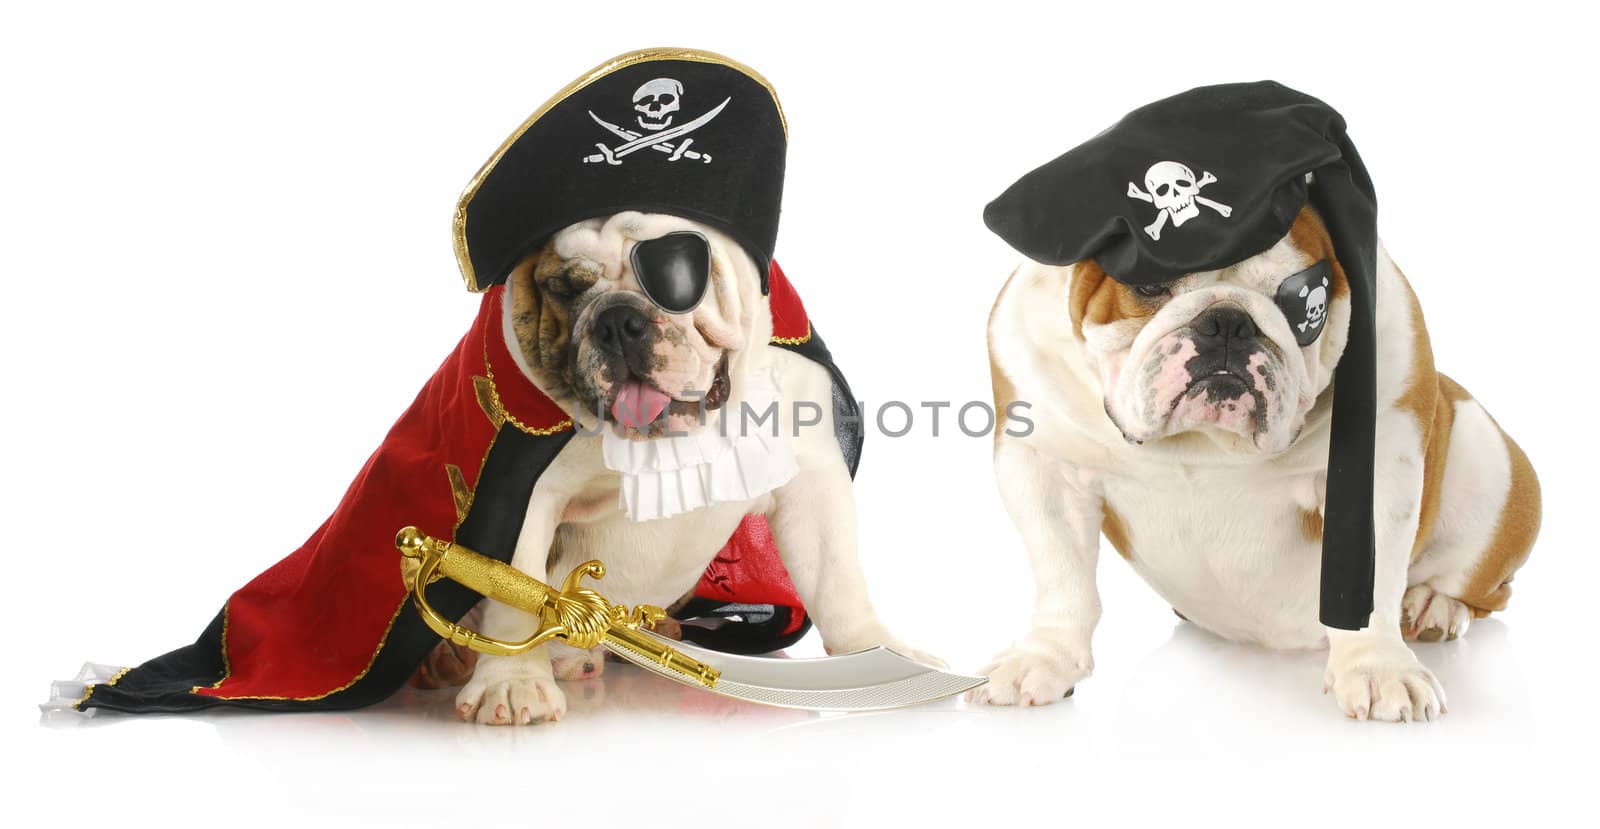 dog pirates - two english bulldogs dressed up in pirate costumes on white background